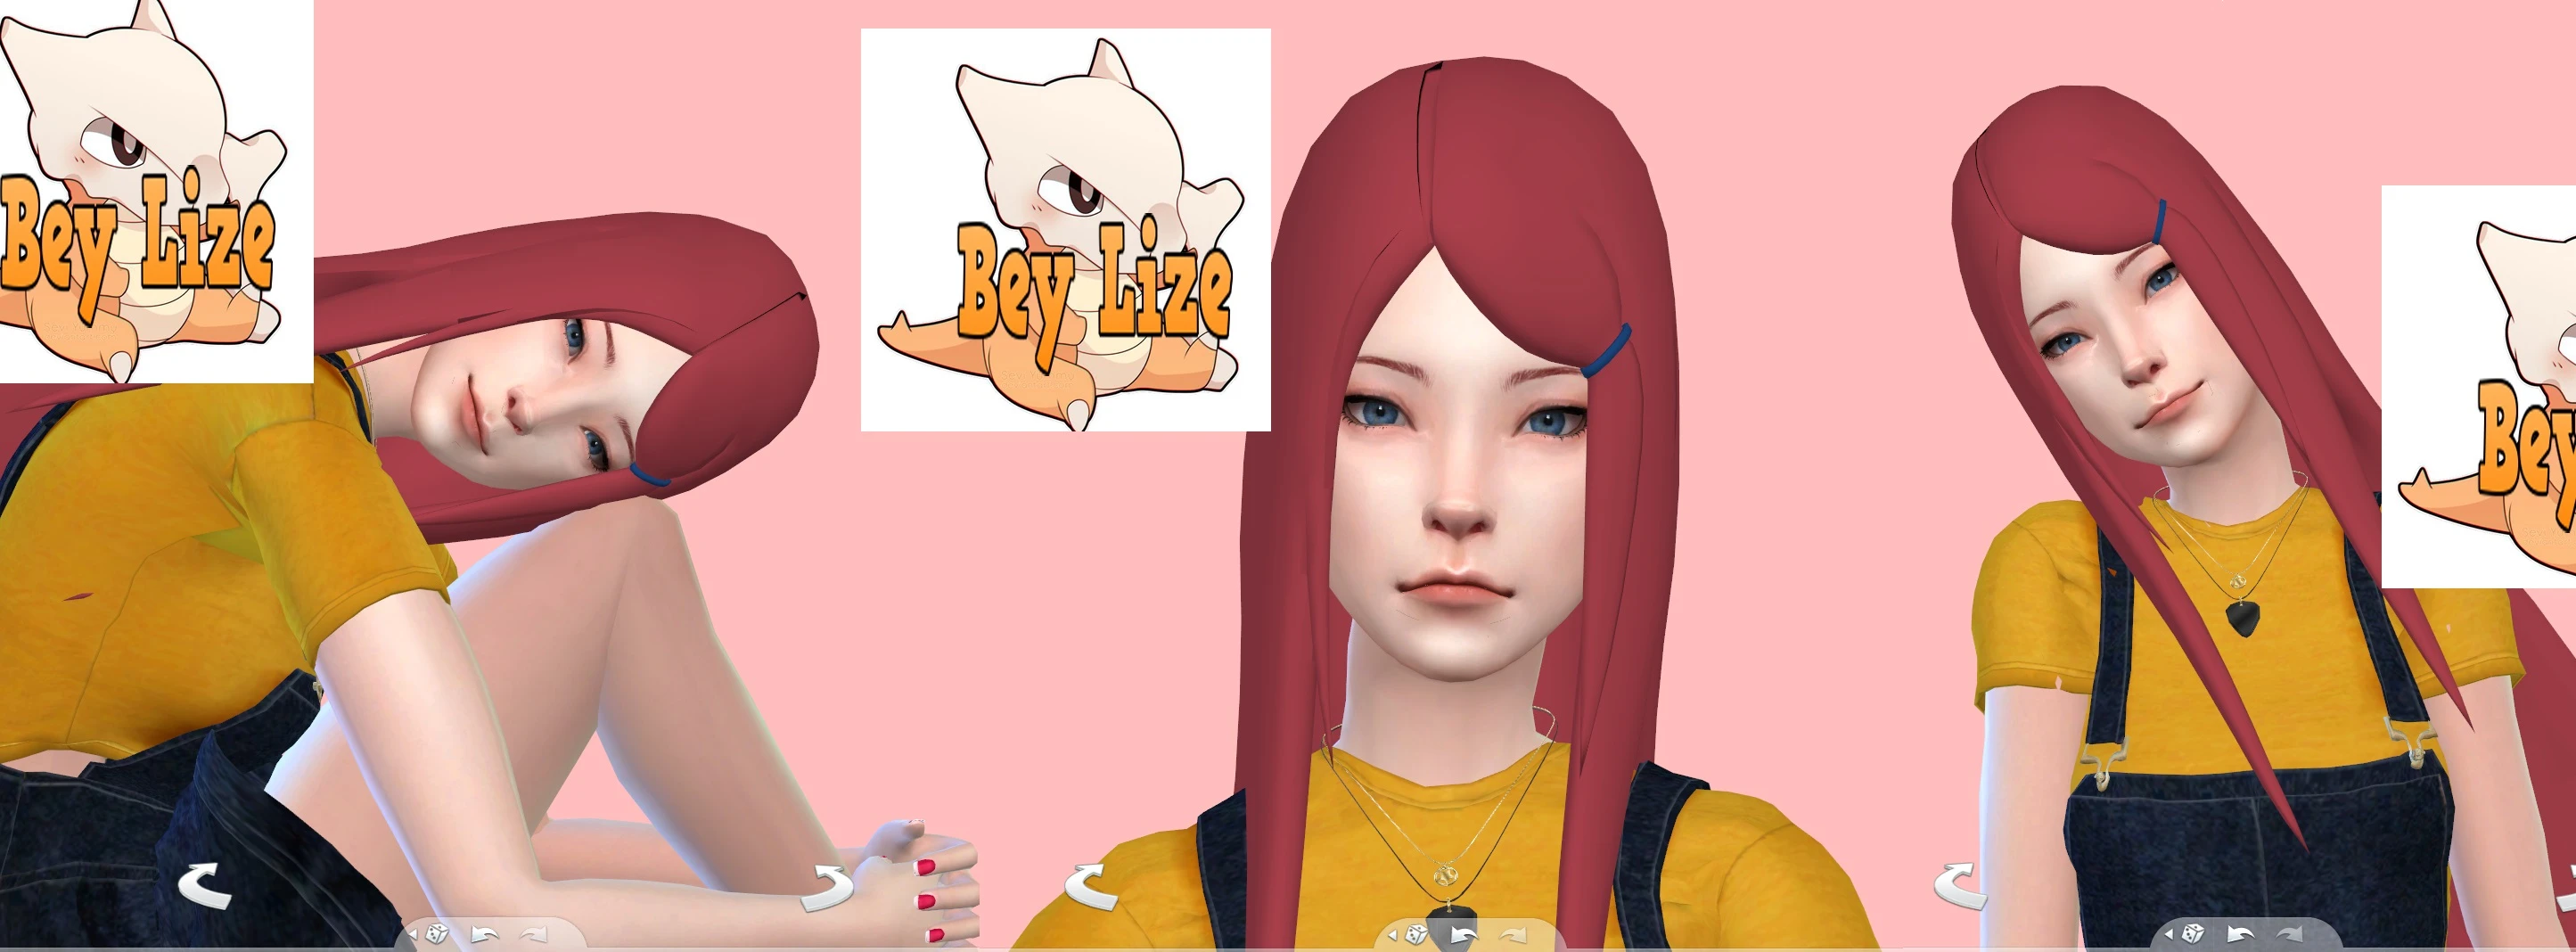 Anime cosplay characters-Free - The Sims 4 - Sims - LoversLab